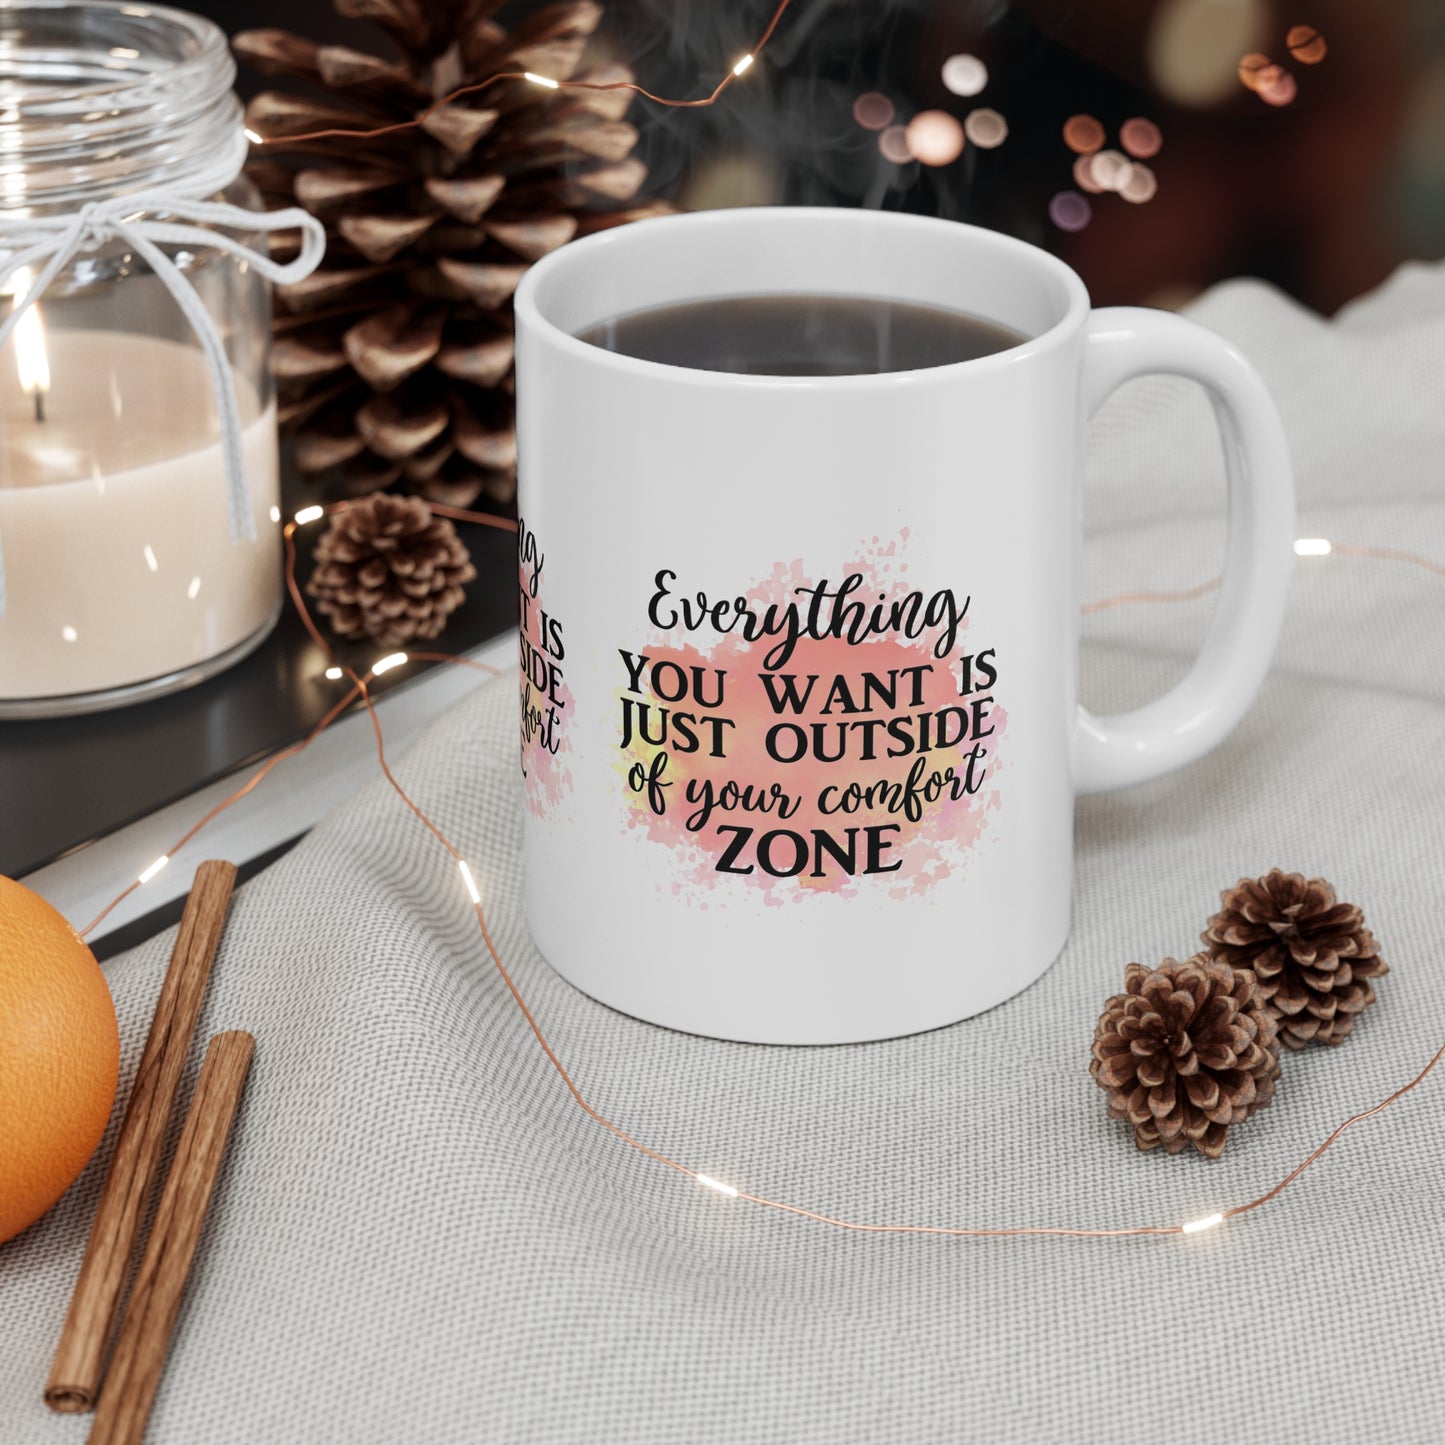 "EVERYTHING YOU WANT is Just Outside of your Comfort Zone" - INSPIRATIONAL MUG - MUGSCITY - Free Shipping